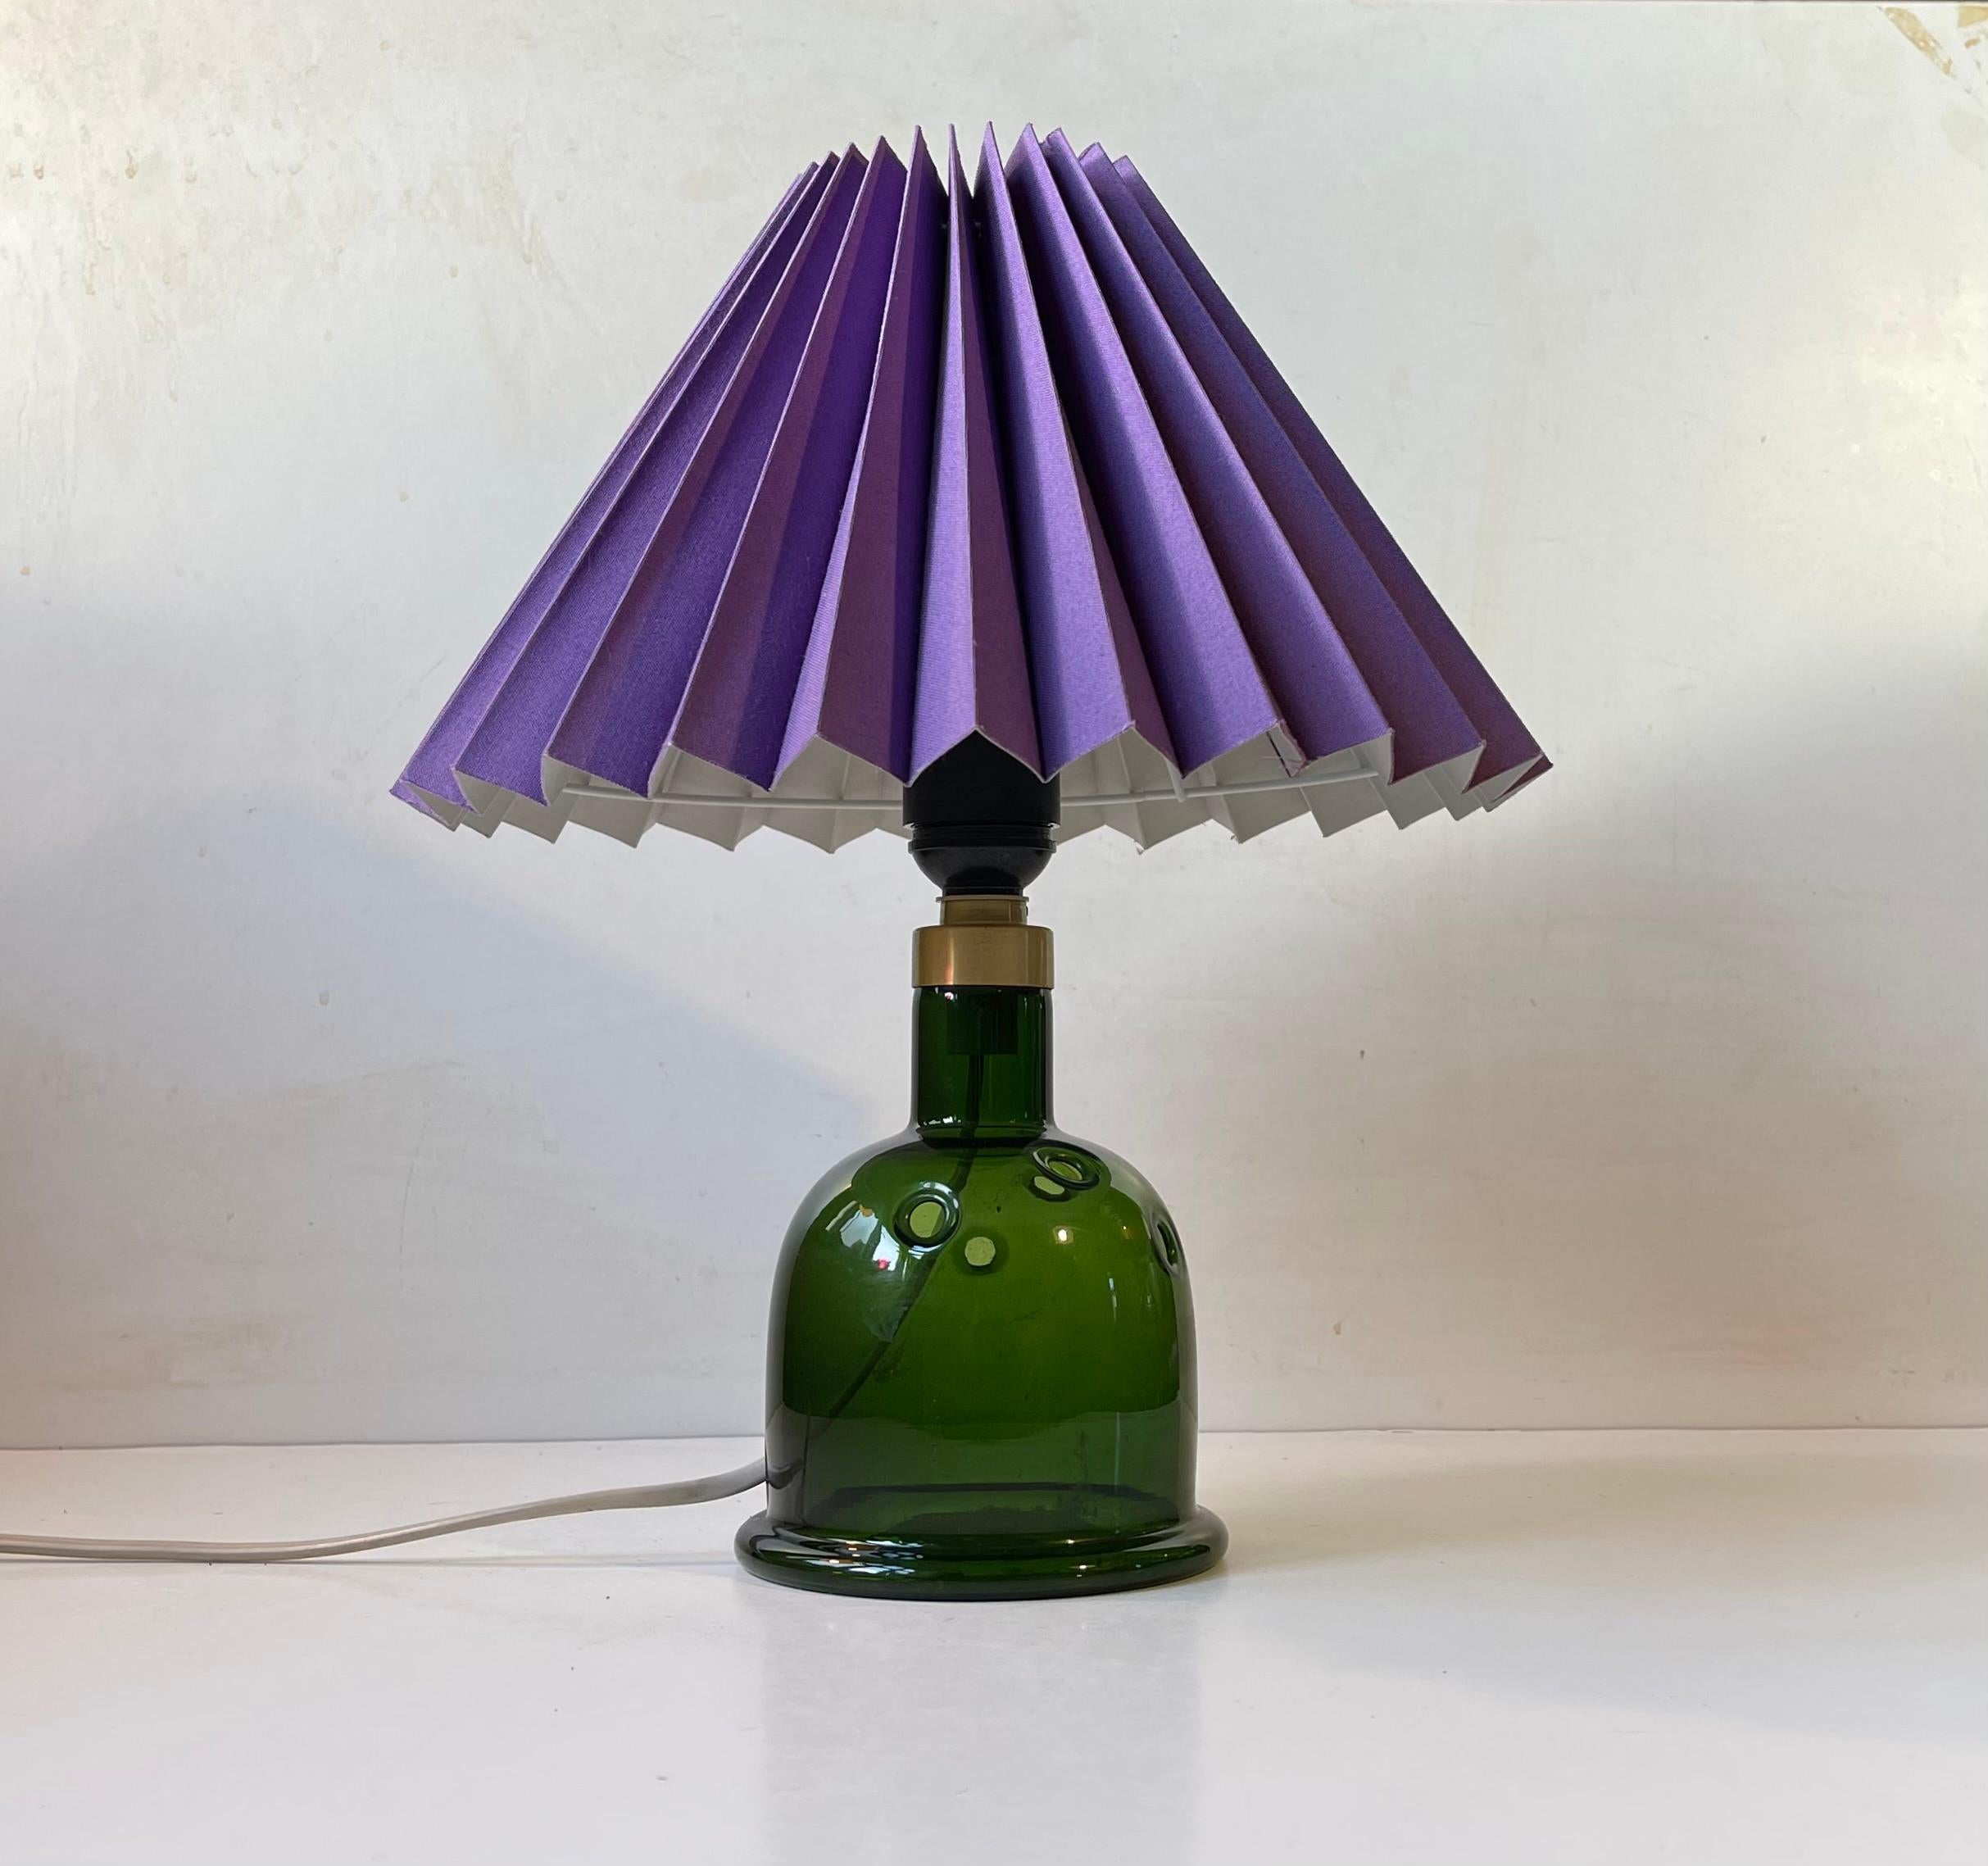 Handblown deep green Glass Table Lamp designed by Michael Bang and manufactured by Holmegaard in Denmark during the late 1970. It is called Meteor. Label from Holmegaard still present beneath the base. Height with shade 35 cm. It comes mounted with